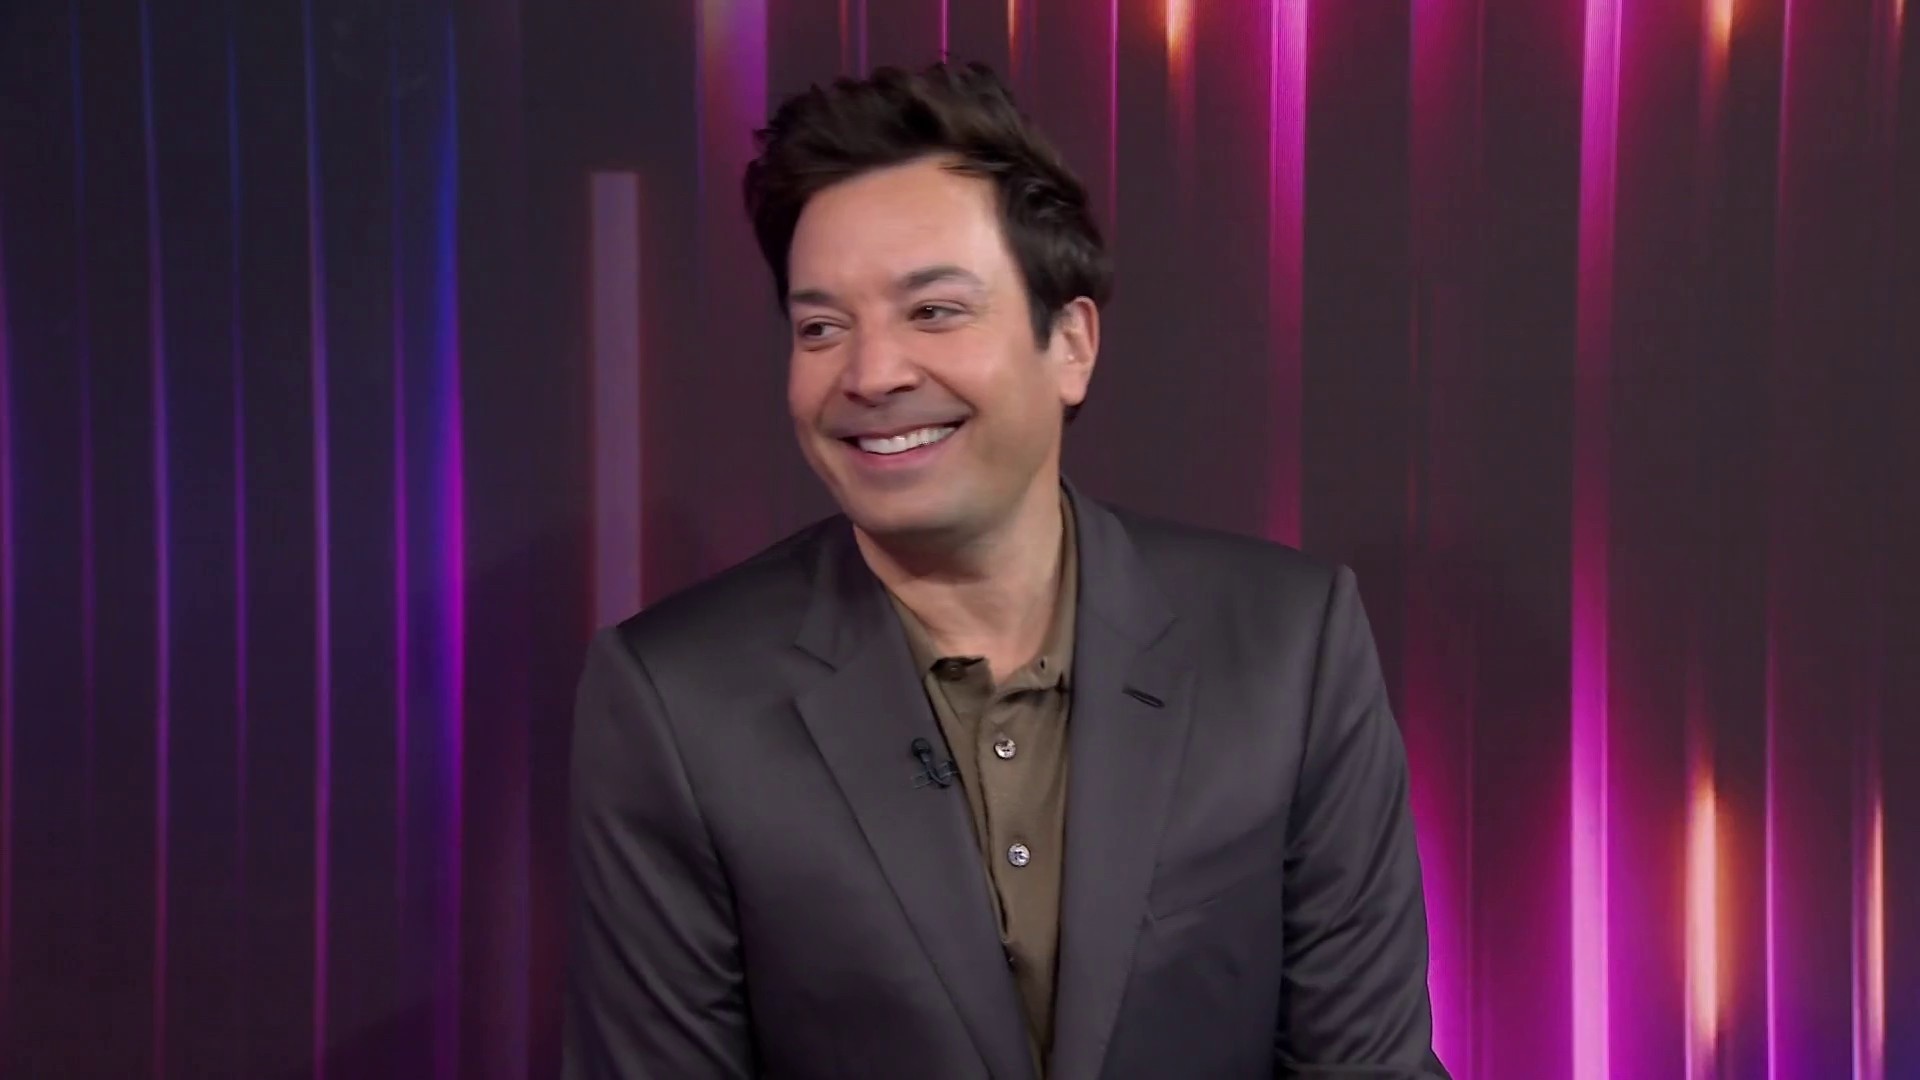 Jimmy Fallon shares fave moments from 10 years of 'Tonight Show'